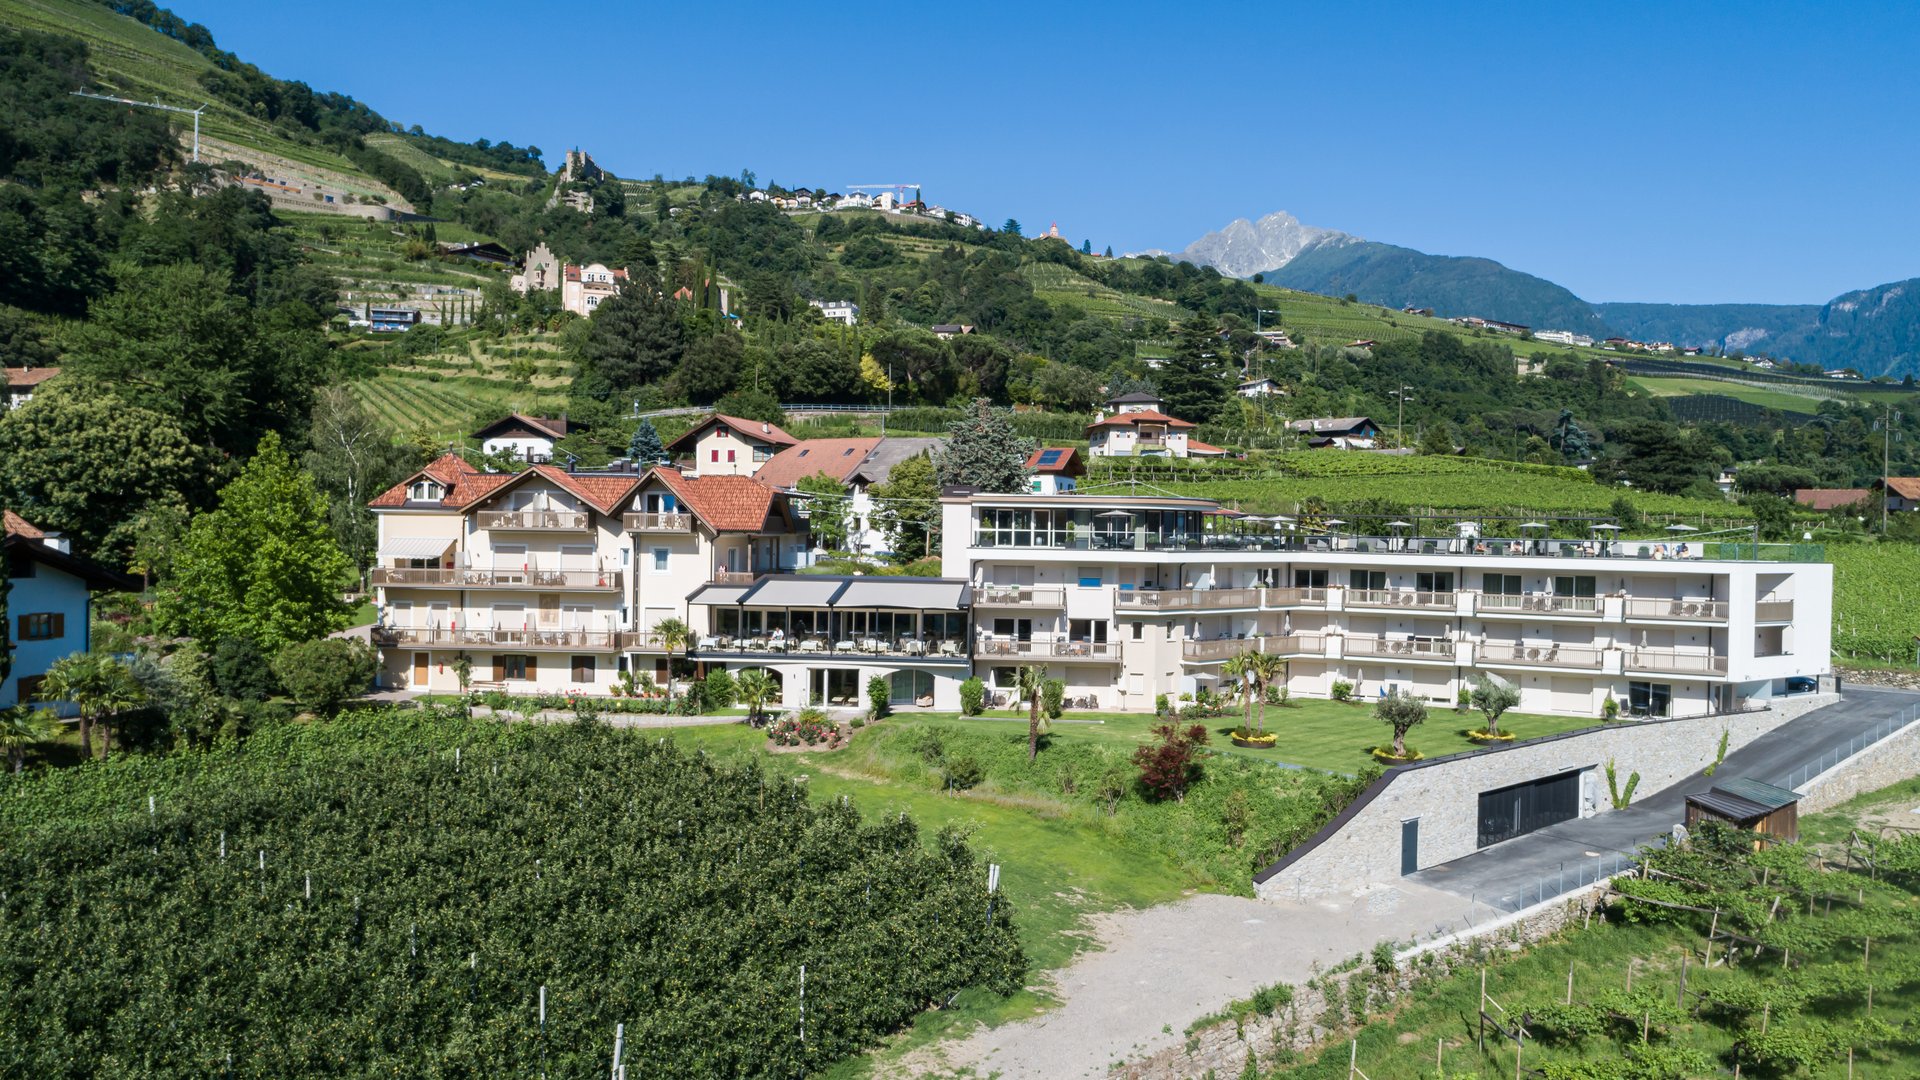 Book your holiday in Meran, South Tyrol